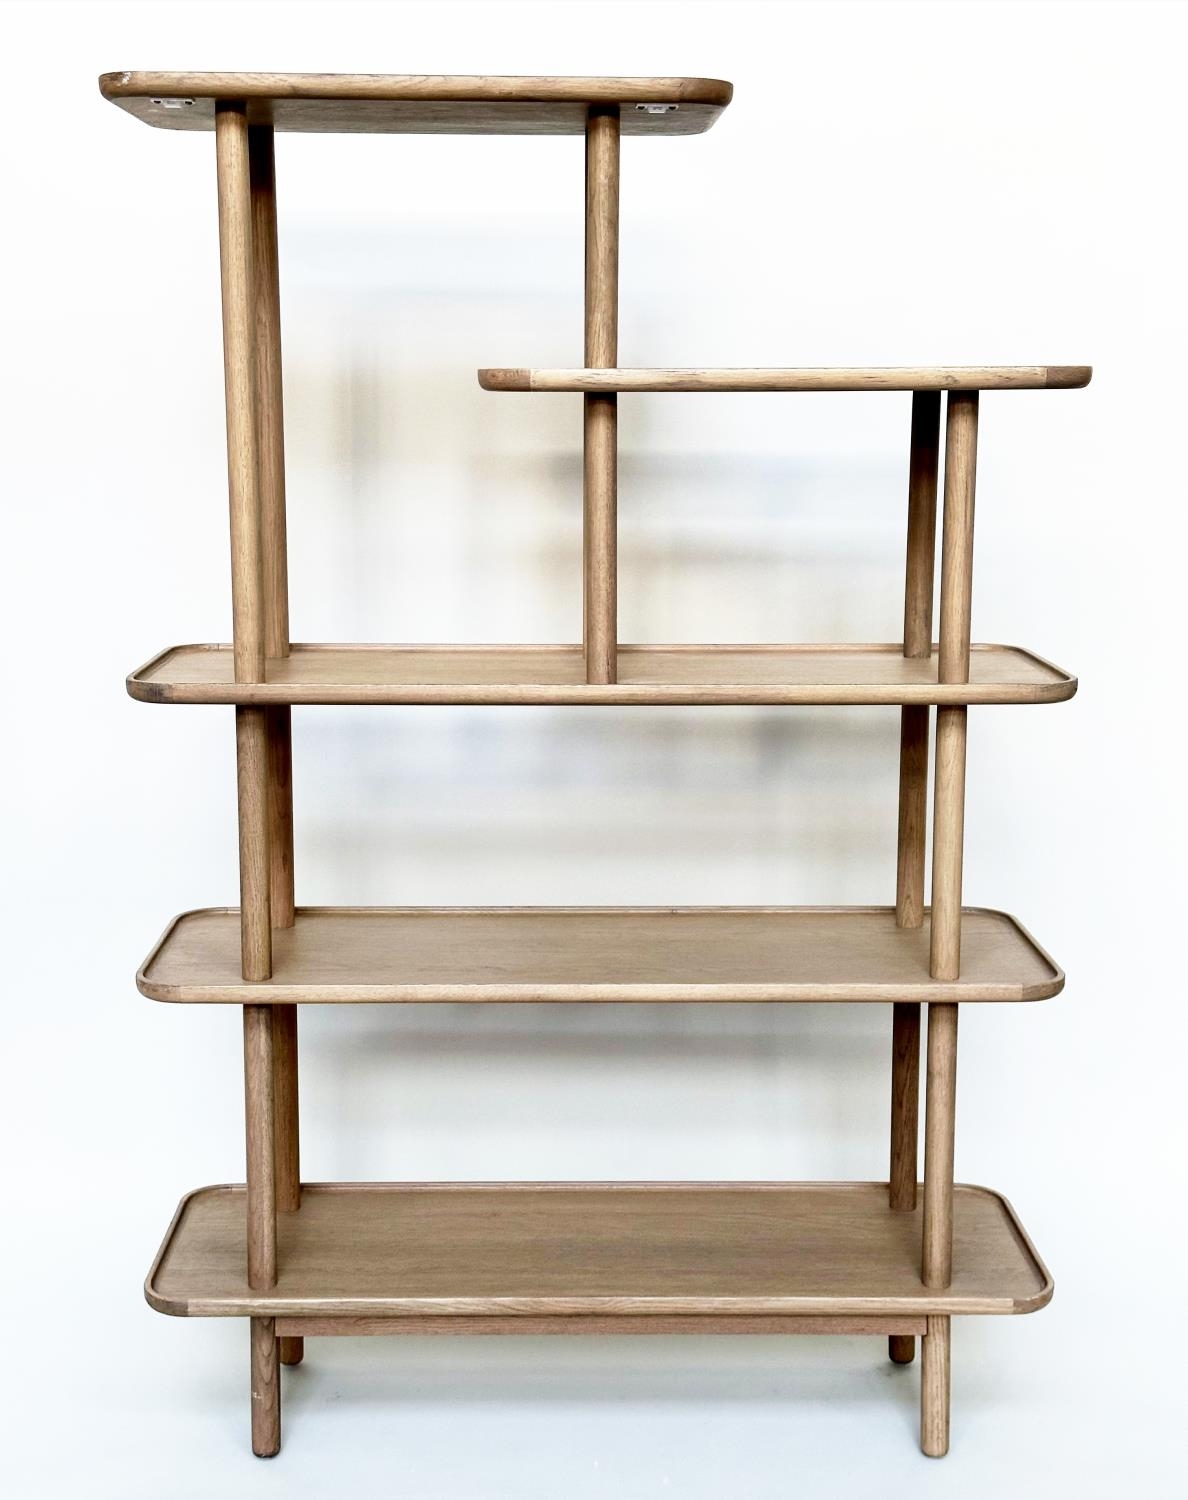 DISPLAY STAND, contemporary oak of five tiers, 164cm H x 110cm W x 39cm D. - Image 6 of 6